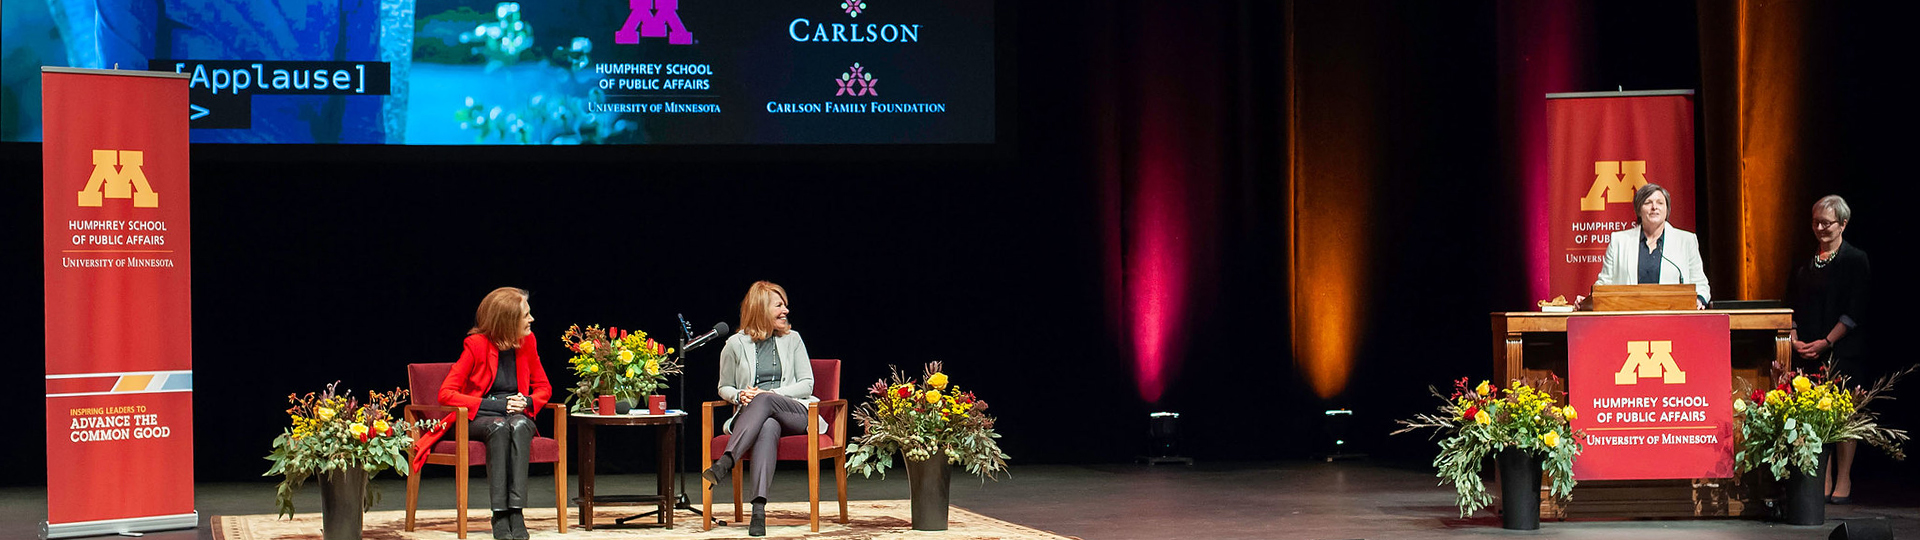 Gloria Steinem and Kerri Miller onstage at Northrop Auditorium with Carlson Family Foundation board chair Wendy Nelson and Humphrey School Dean Laura Bloomberg